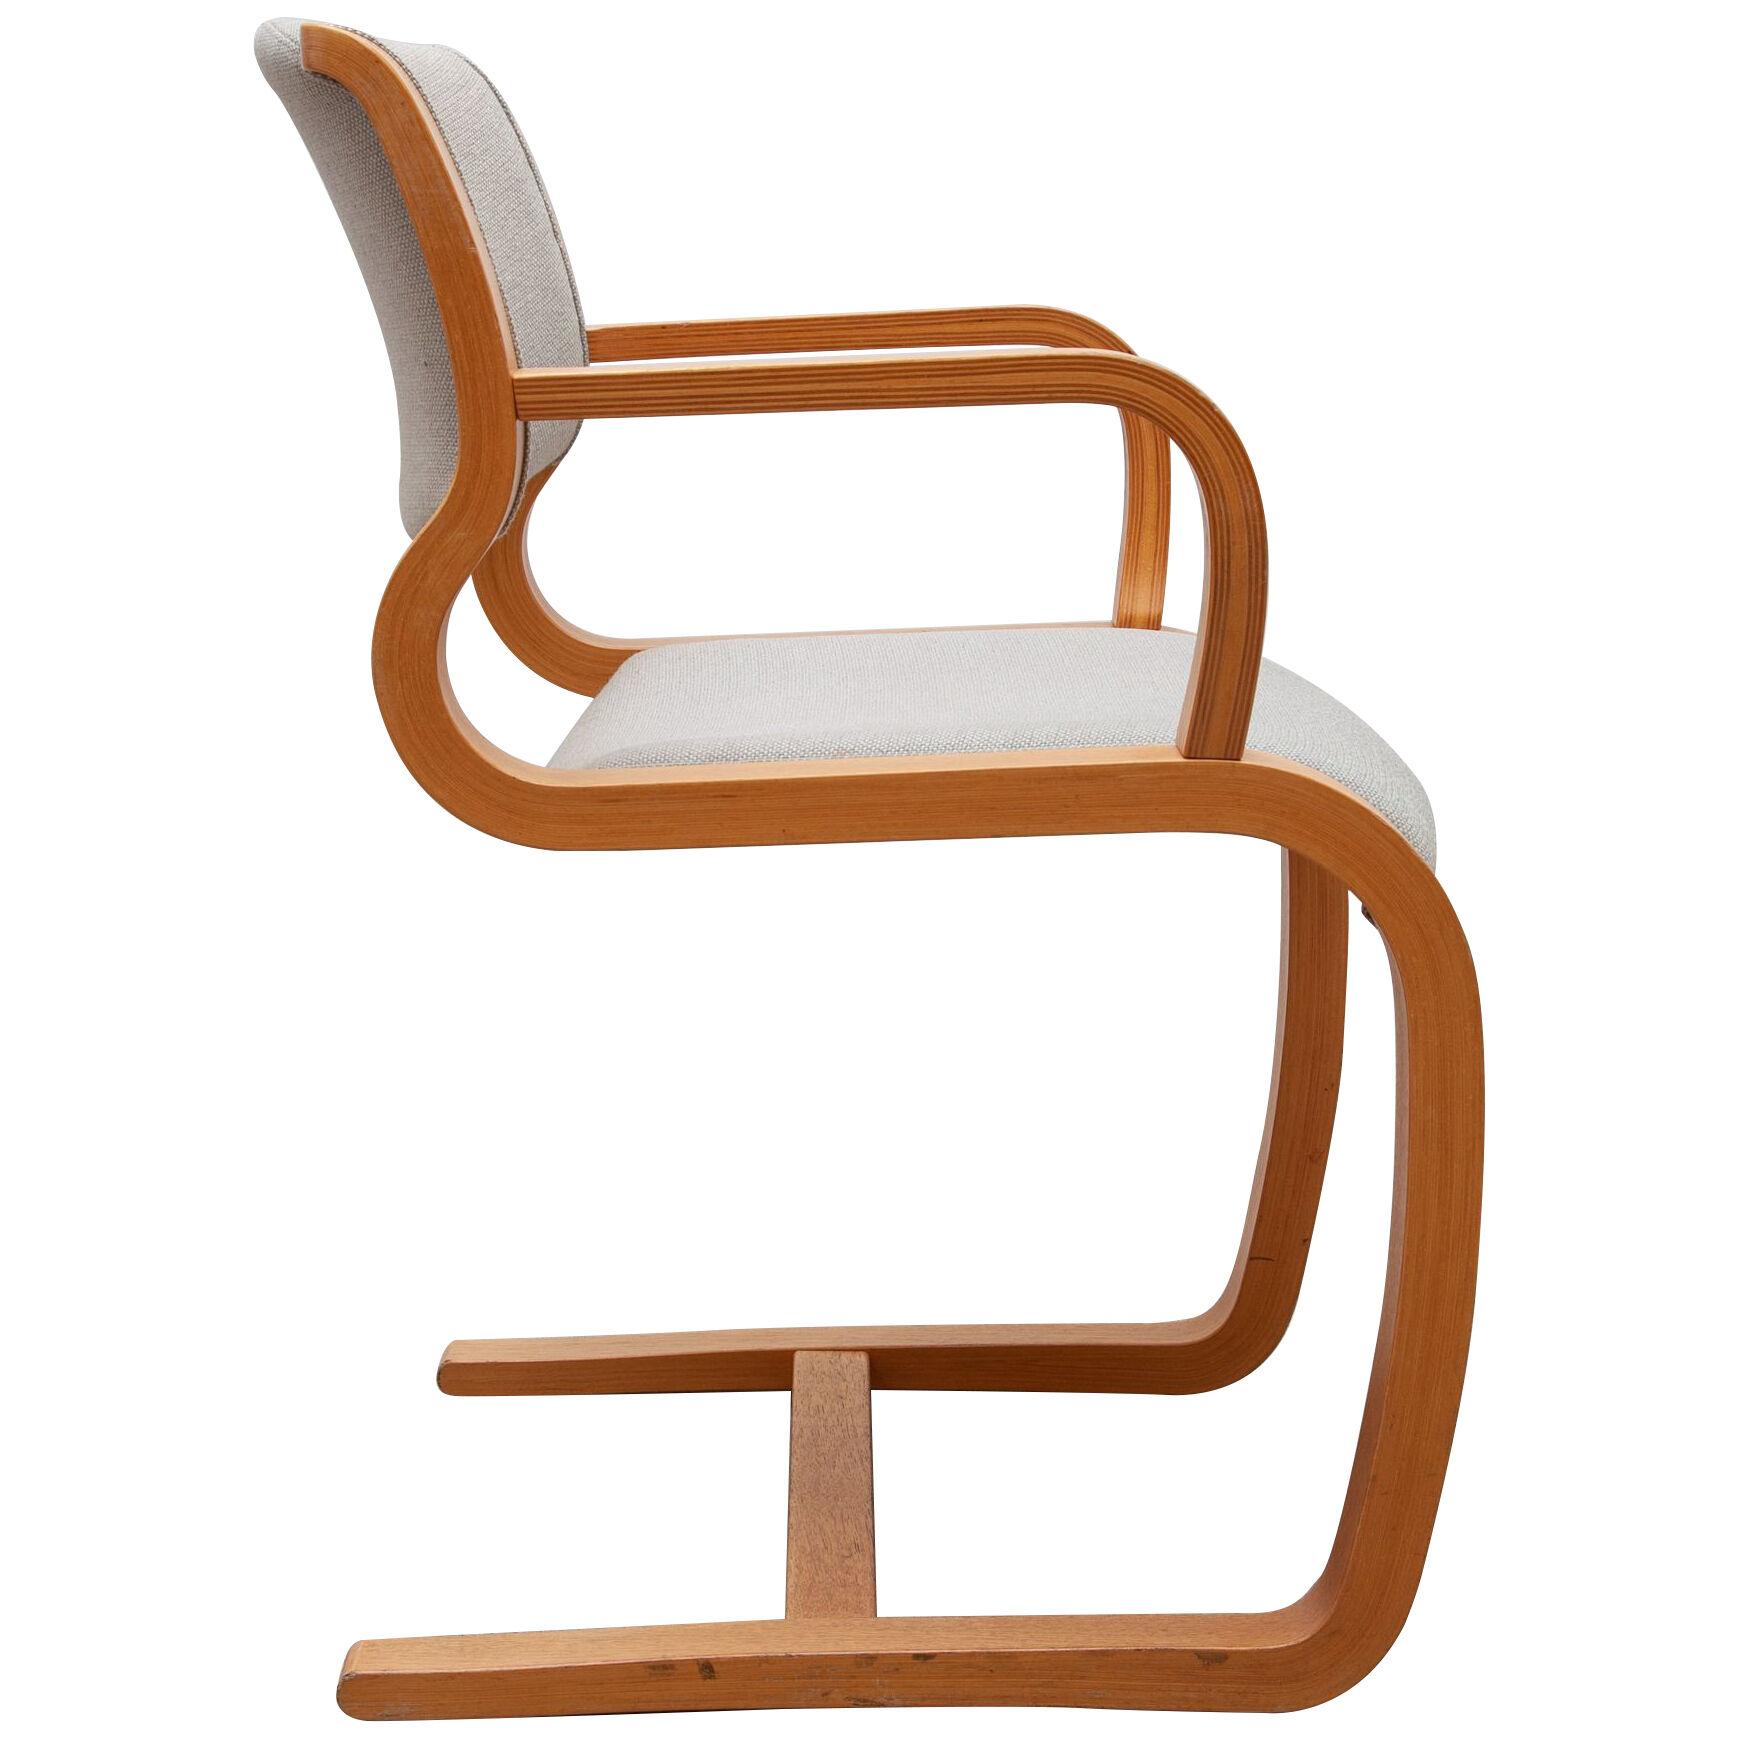 Cantilever Arm Chairs Designed by Magnus Olesen, Denmark, 1975